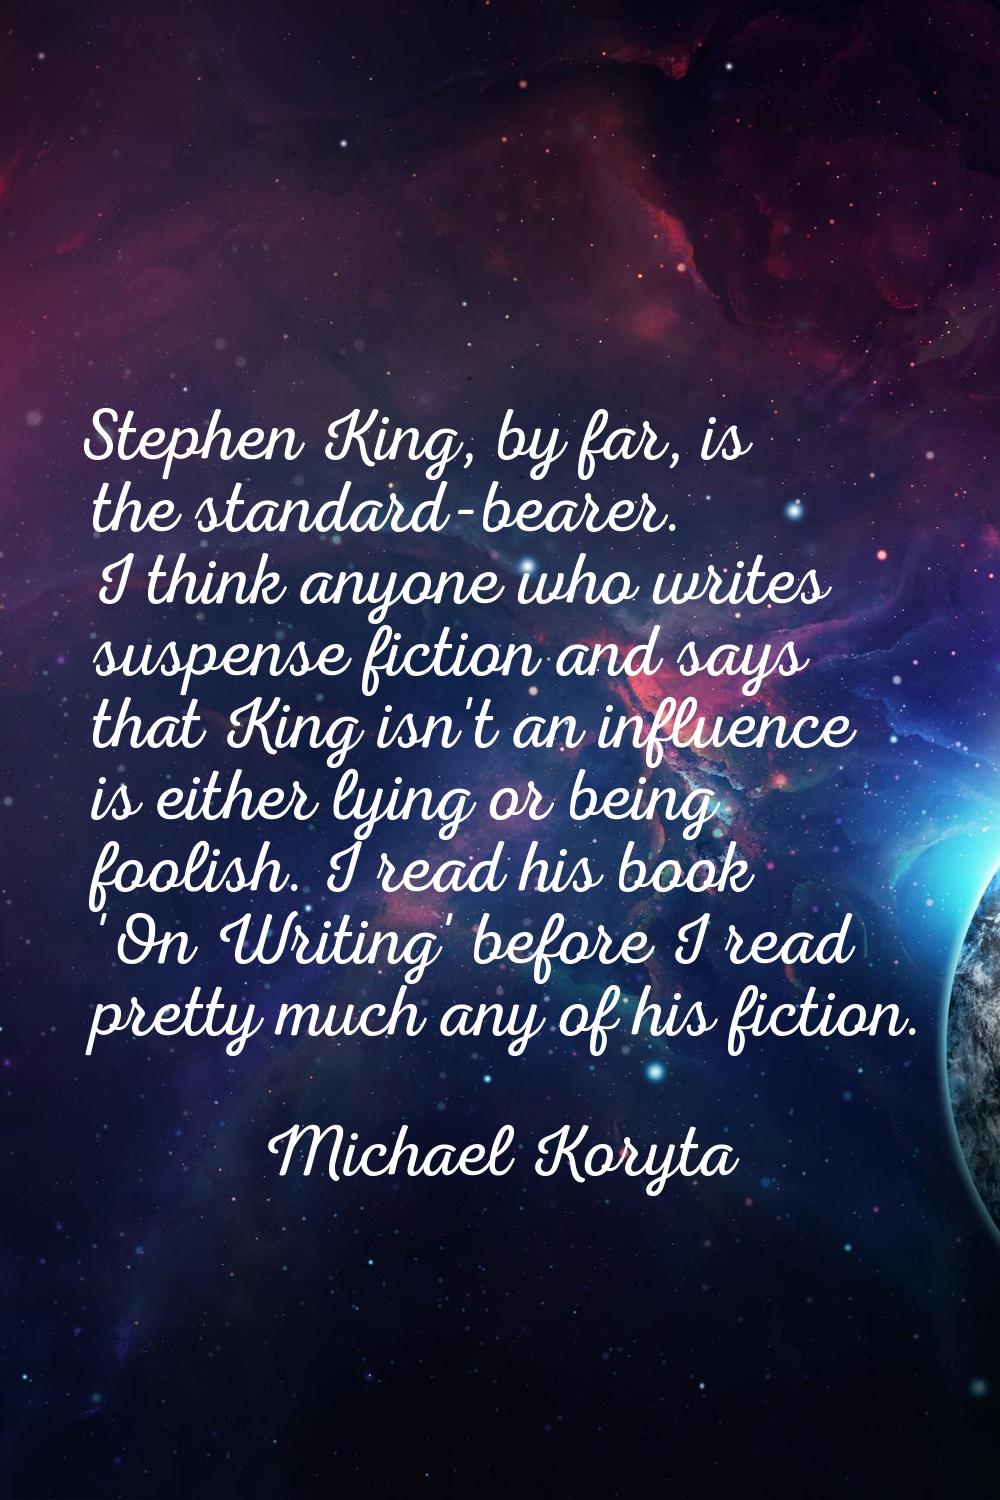 Stephen King, by far, is the standard-bearer. I think anyone who writes suspense fiction and says t